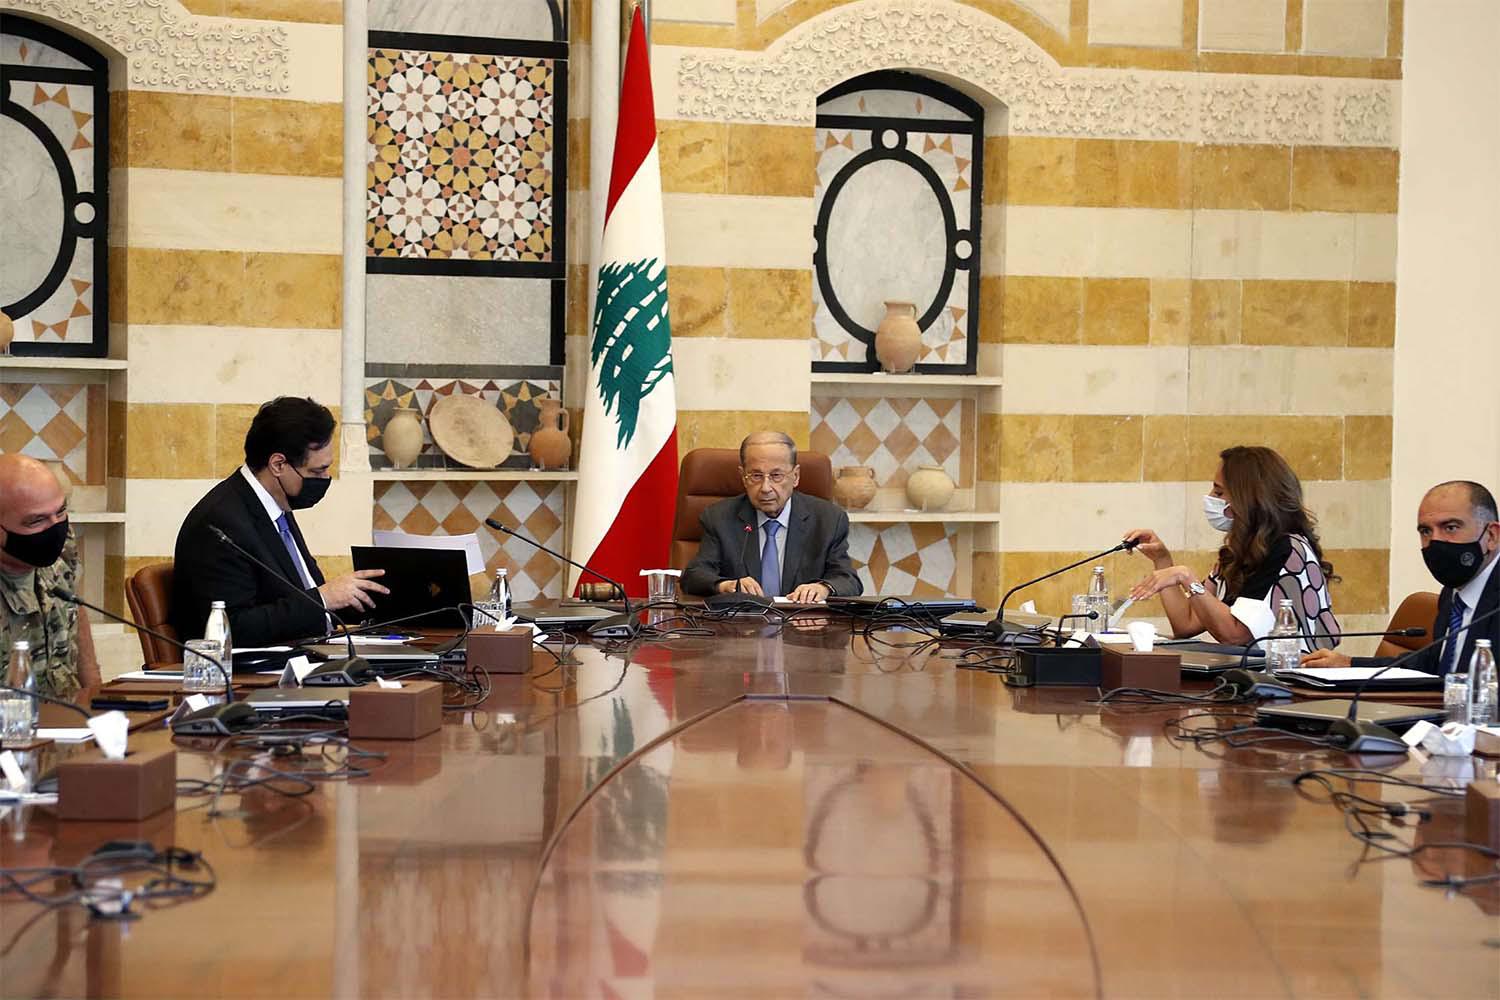 Paris is reluctant to set a new deadline for Lebanese politicians to form a new government